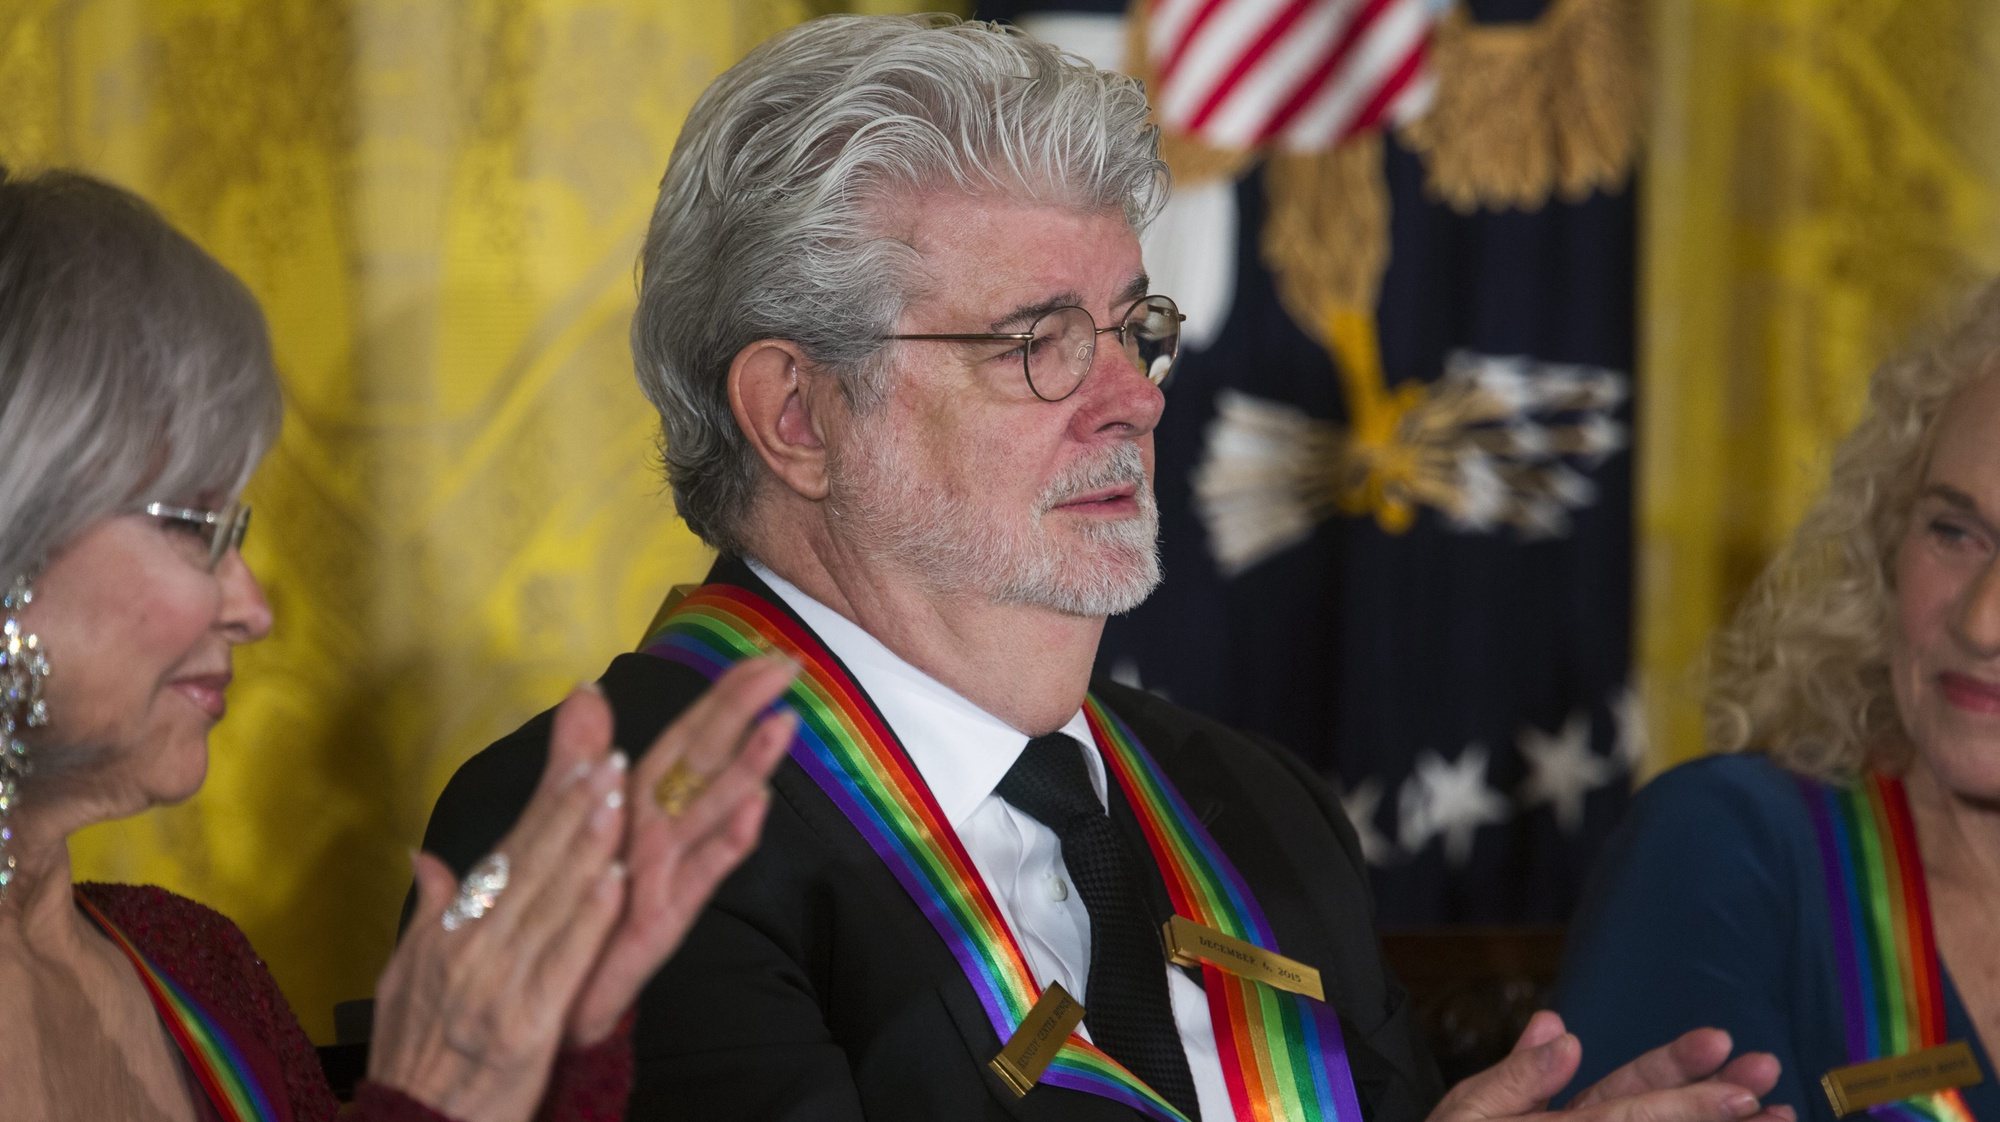 epa05057651 Filmmaker George Lucas attends the Kennedy Center Honorees Reception in the East Room of the White House in Washington, DC, USA, 06 December 2015. US President Barack Obama and First Lady Michelle Obama hosted the gathering  EPA/JIM LO SCALZO